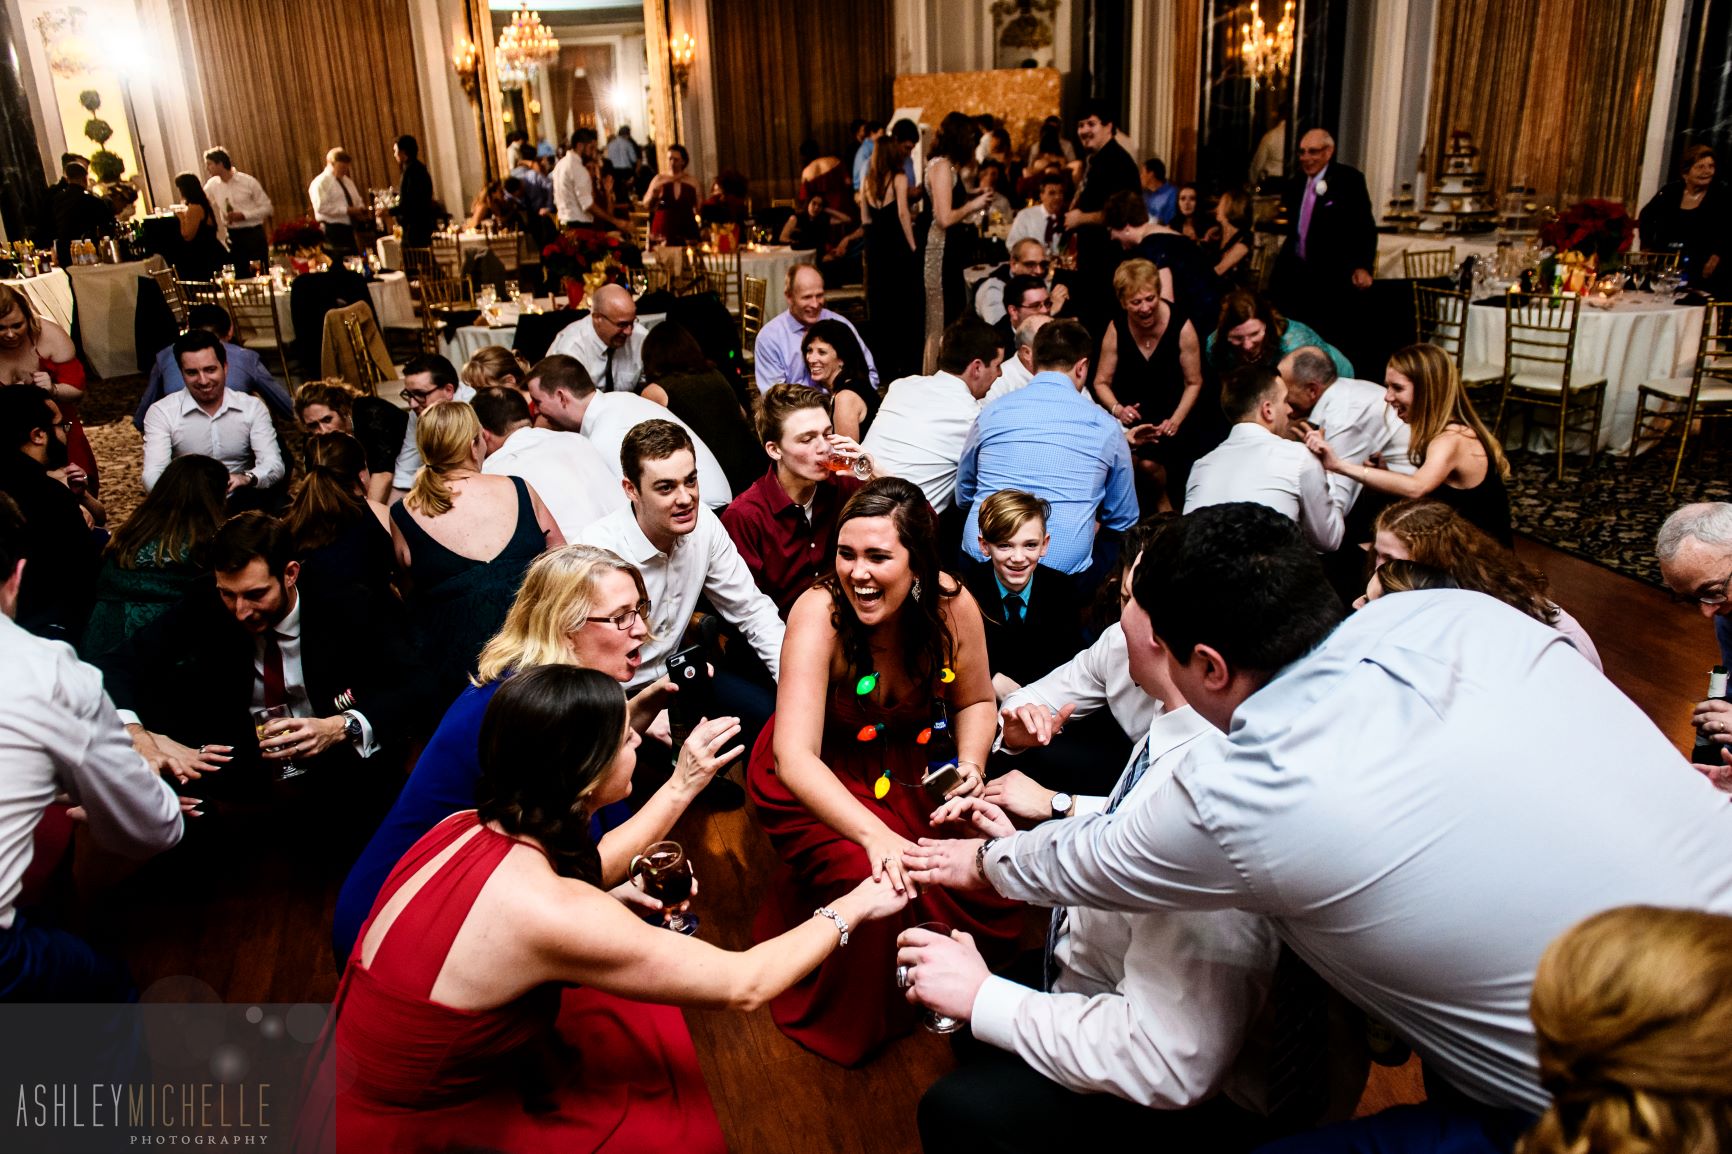 DJ Greyhound provides dj services for weddings in PA, MD, DC, and VA.  Photo courtesy of Ashley Michelle Photography.